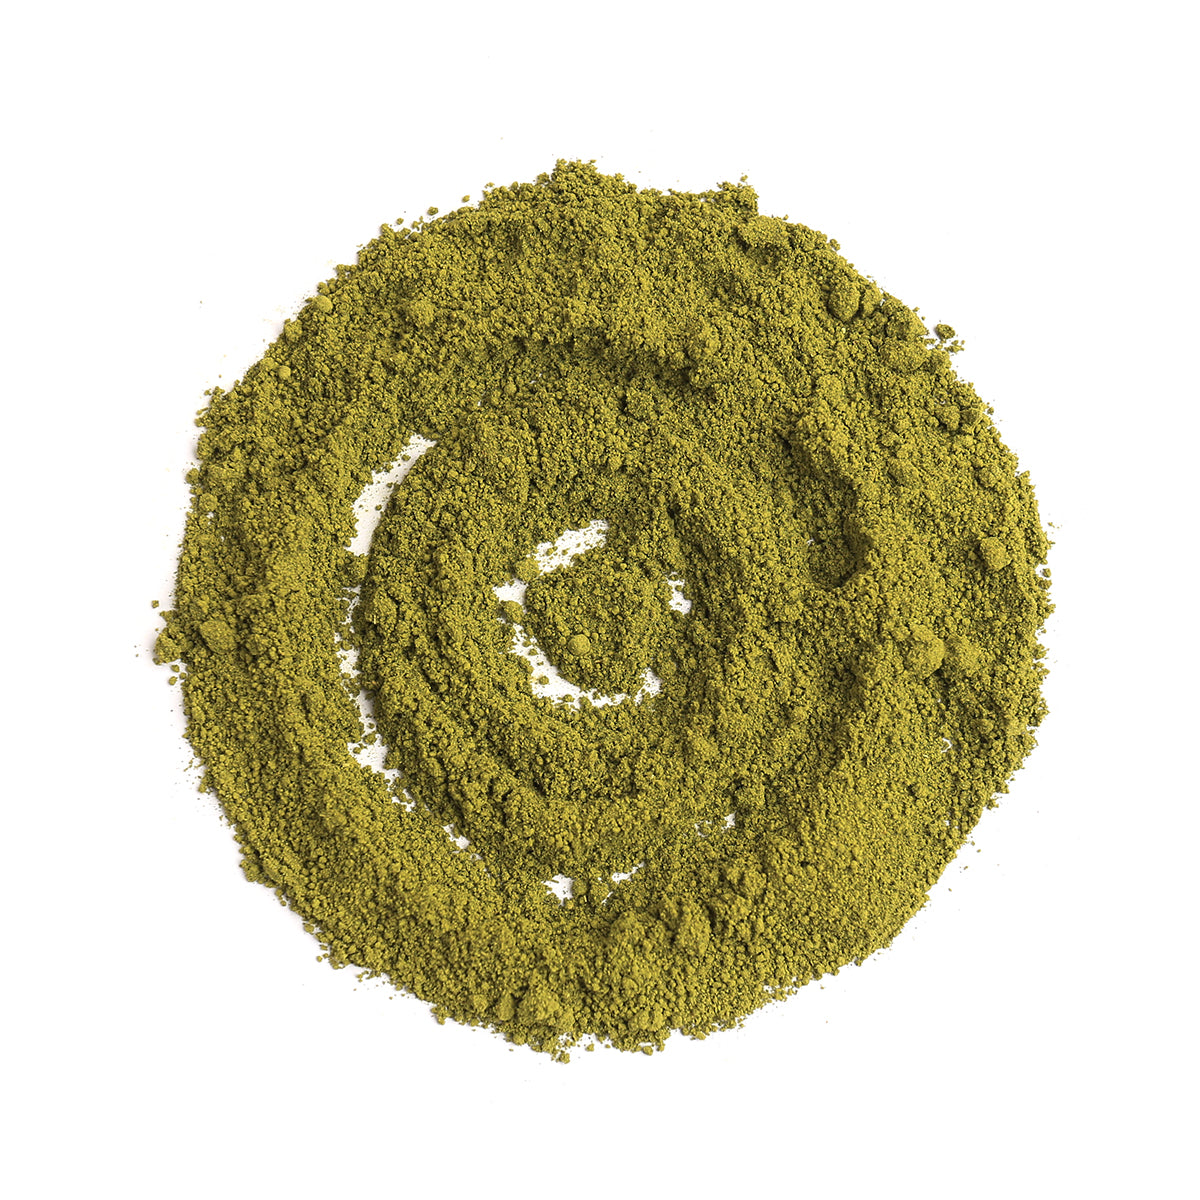 Matcha Tea Powder Benefits for Your Body and Your Mind  The Japanese have known it for centuries, and now the Western world is finally cottoning onto how matcha tea powder benefits both your body and your soul.  Matcha green tea happens to be top of the f